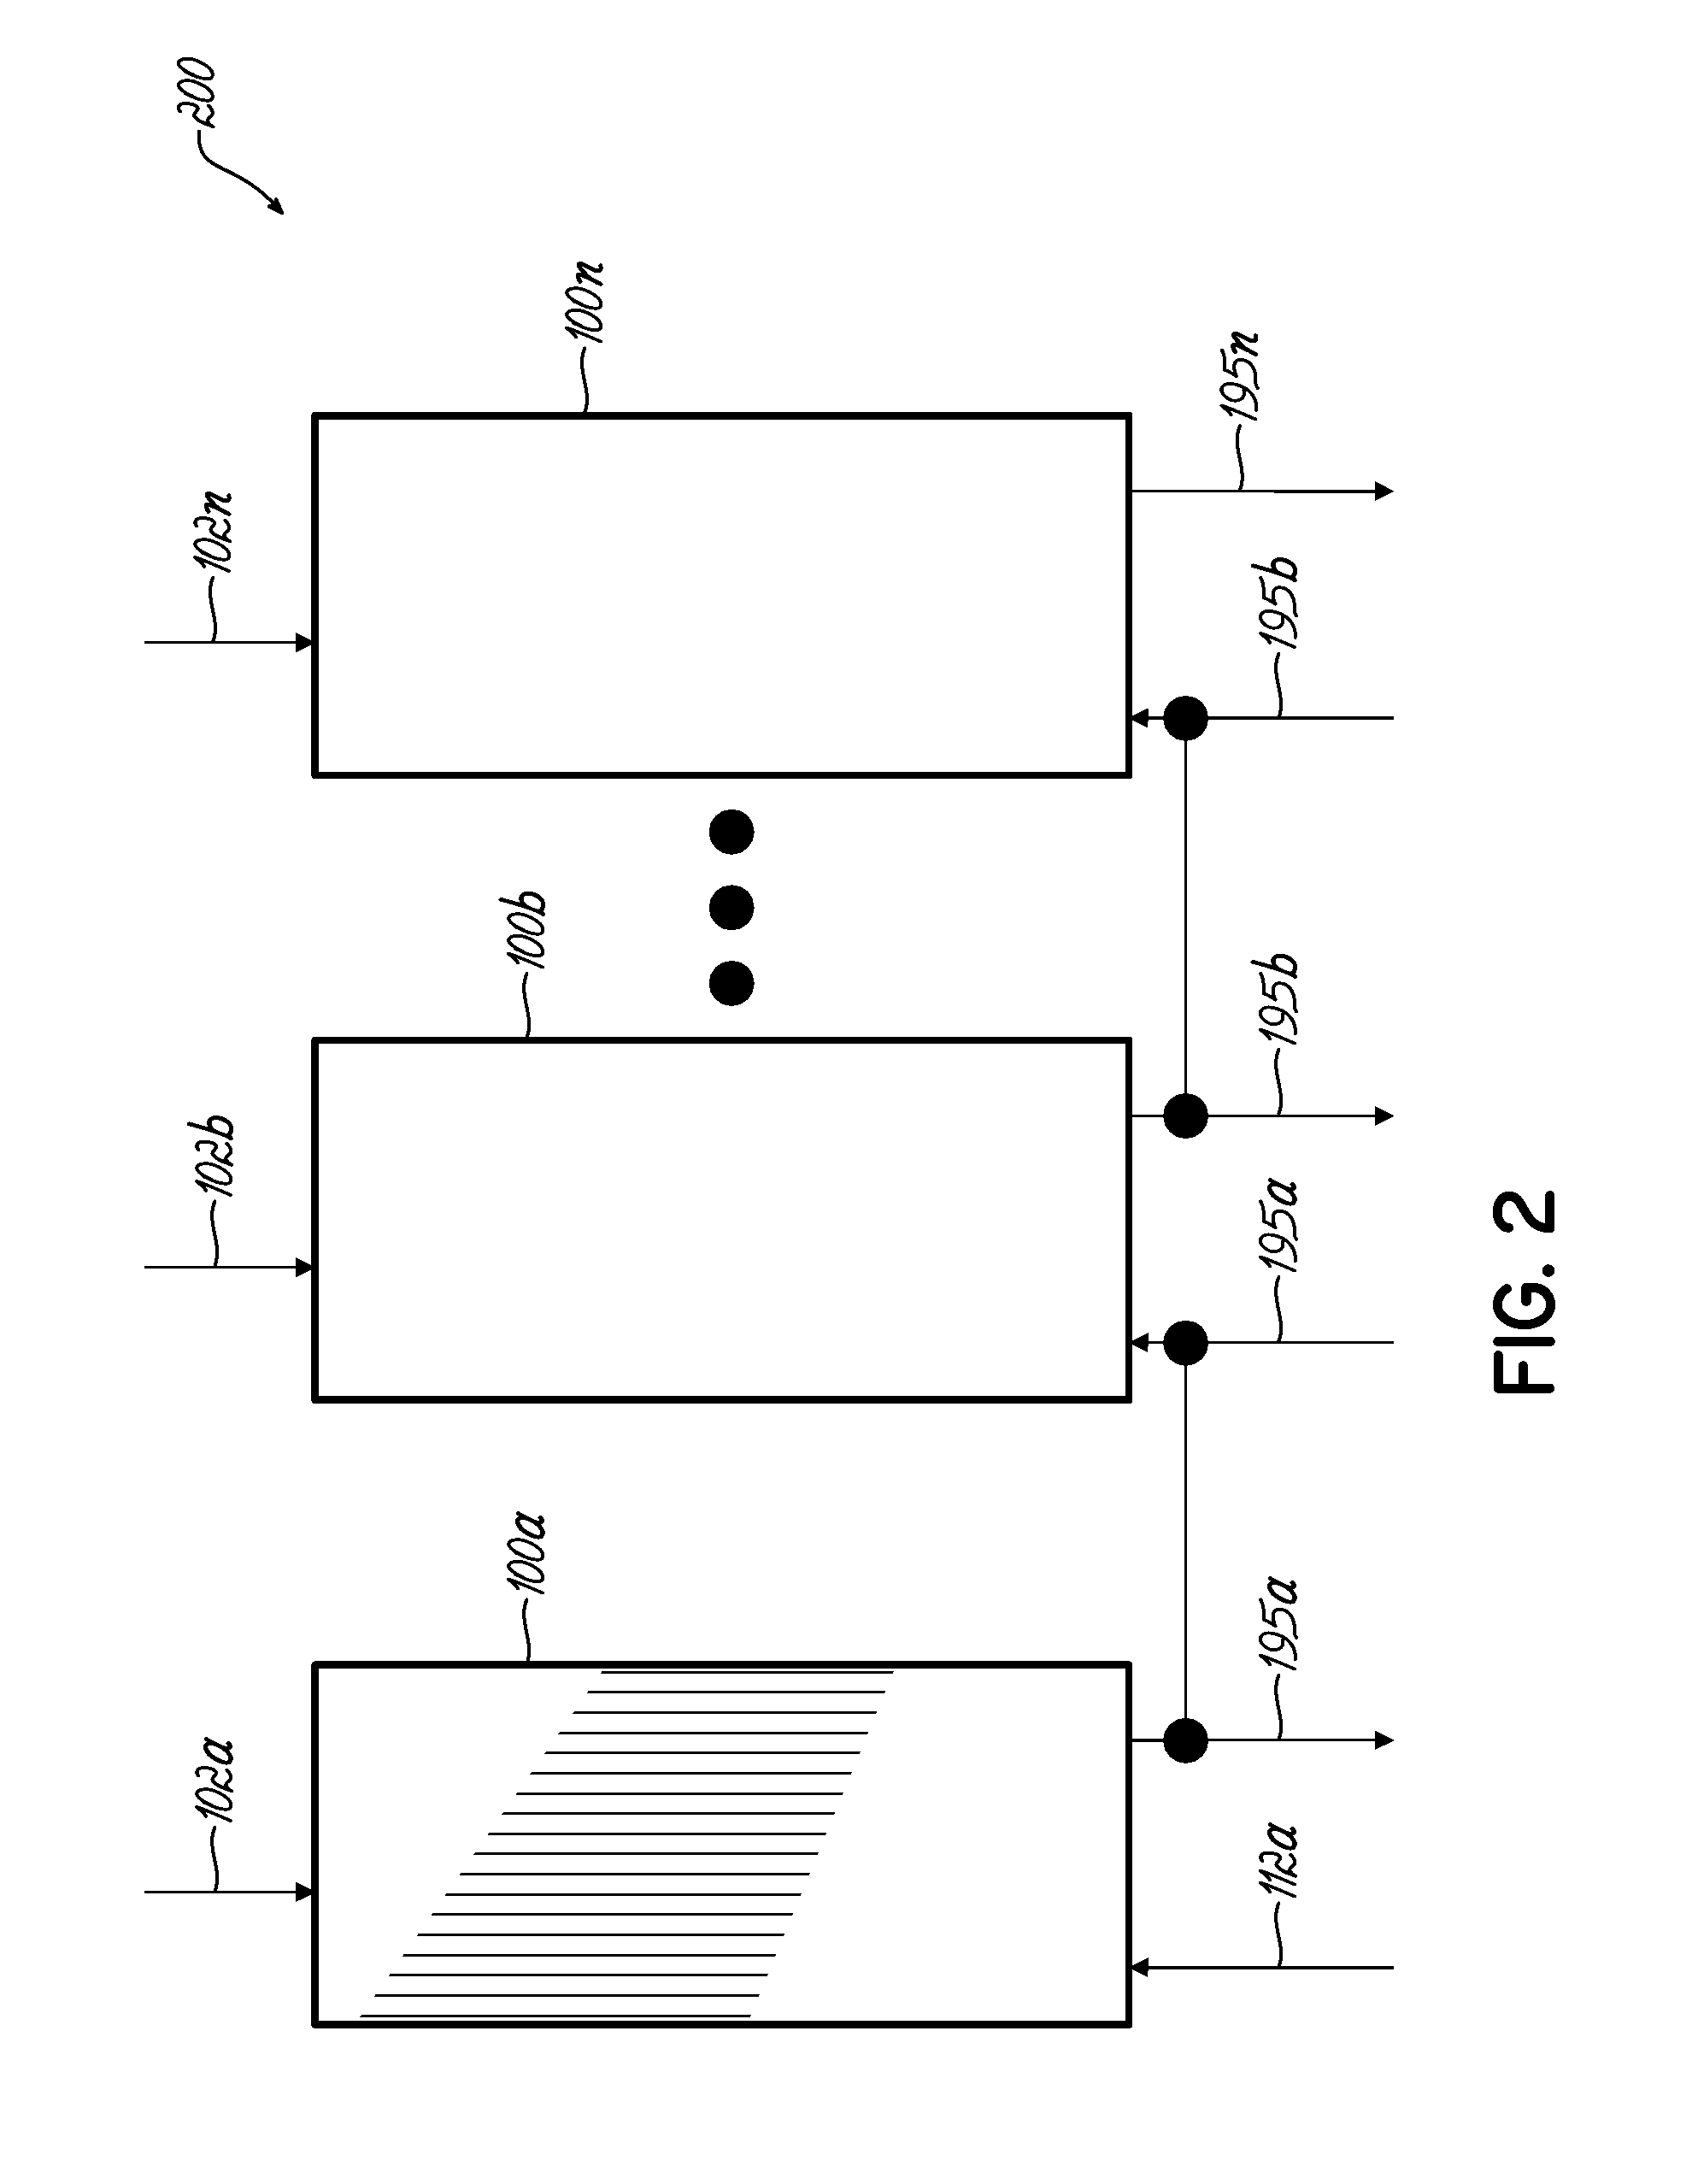 Solar power generation, distribution, and communication system